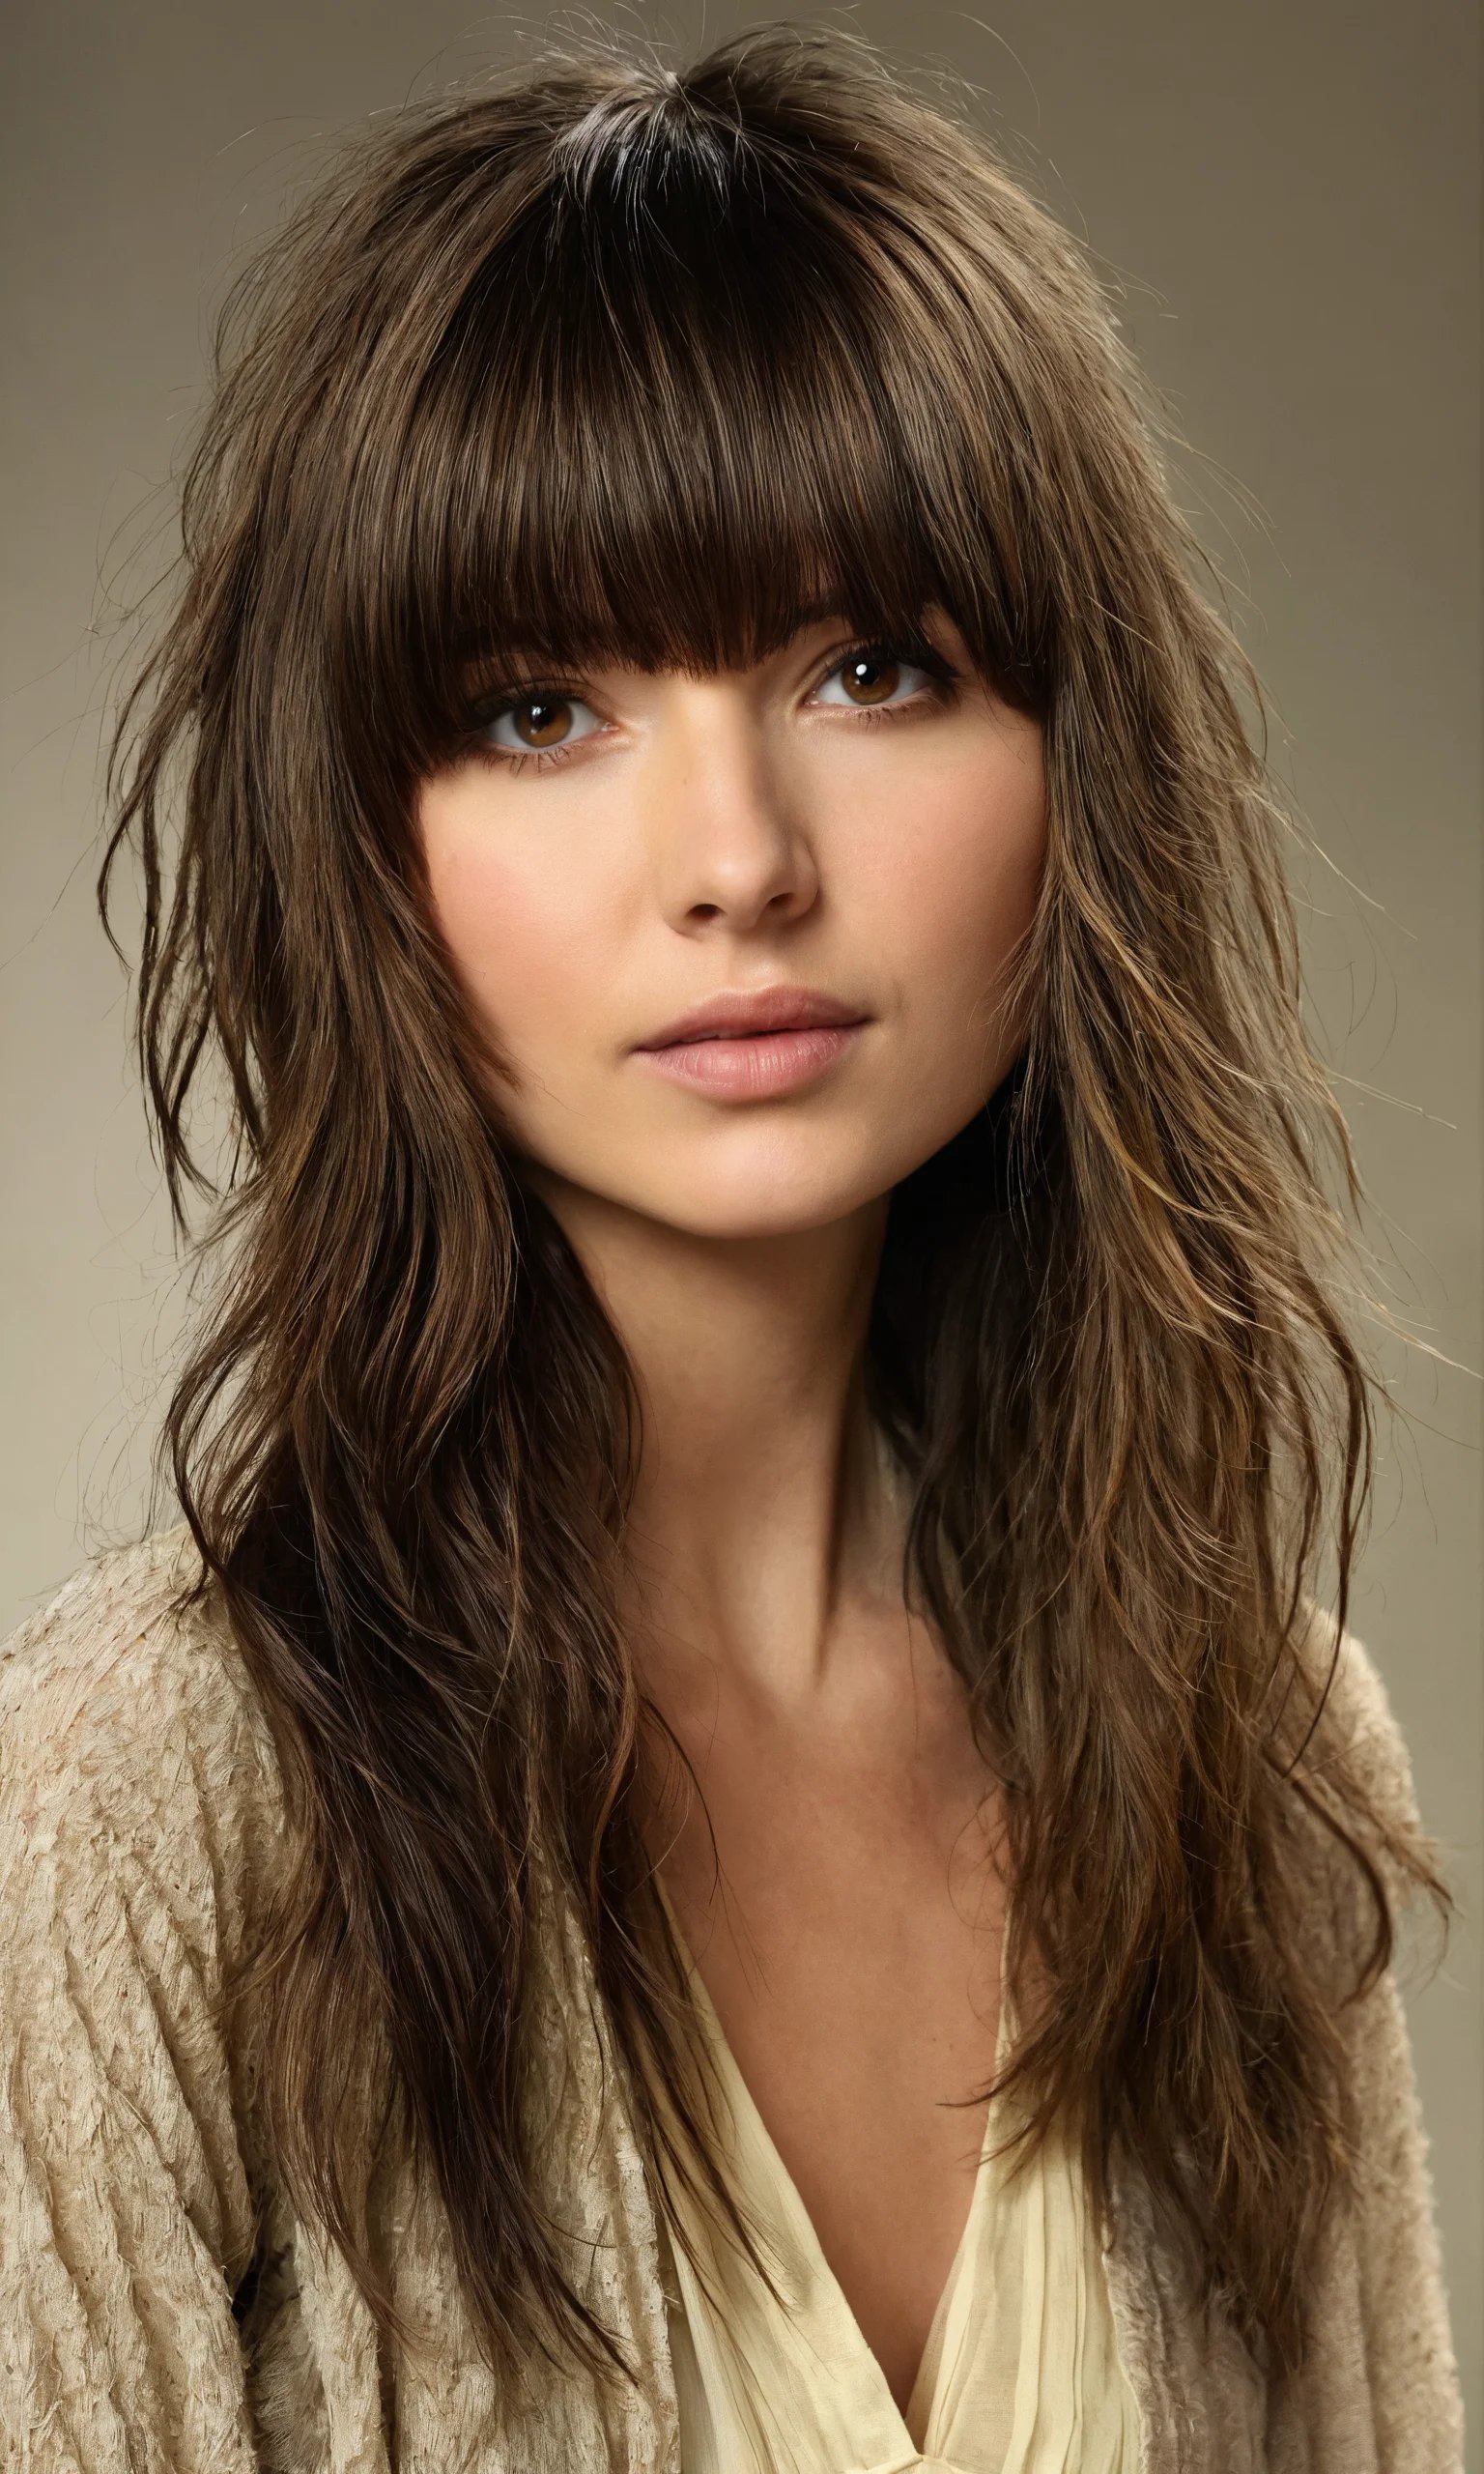 21 İdeas For Summer Haircuts With Bangs